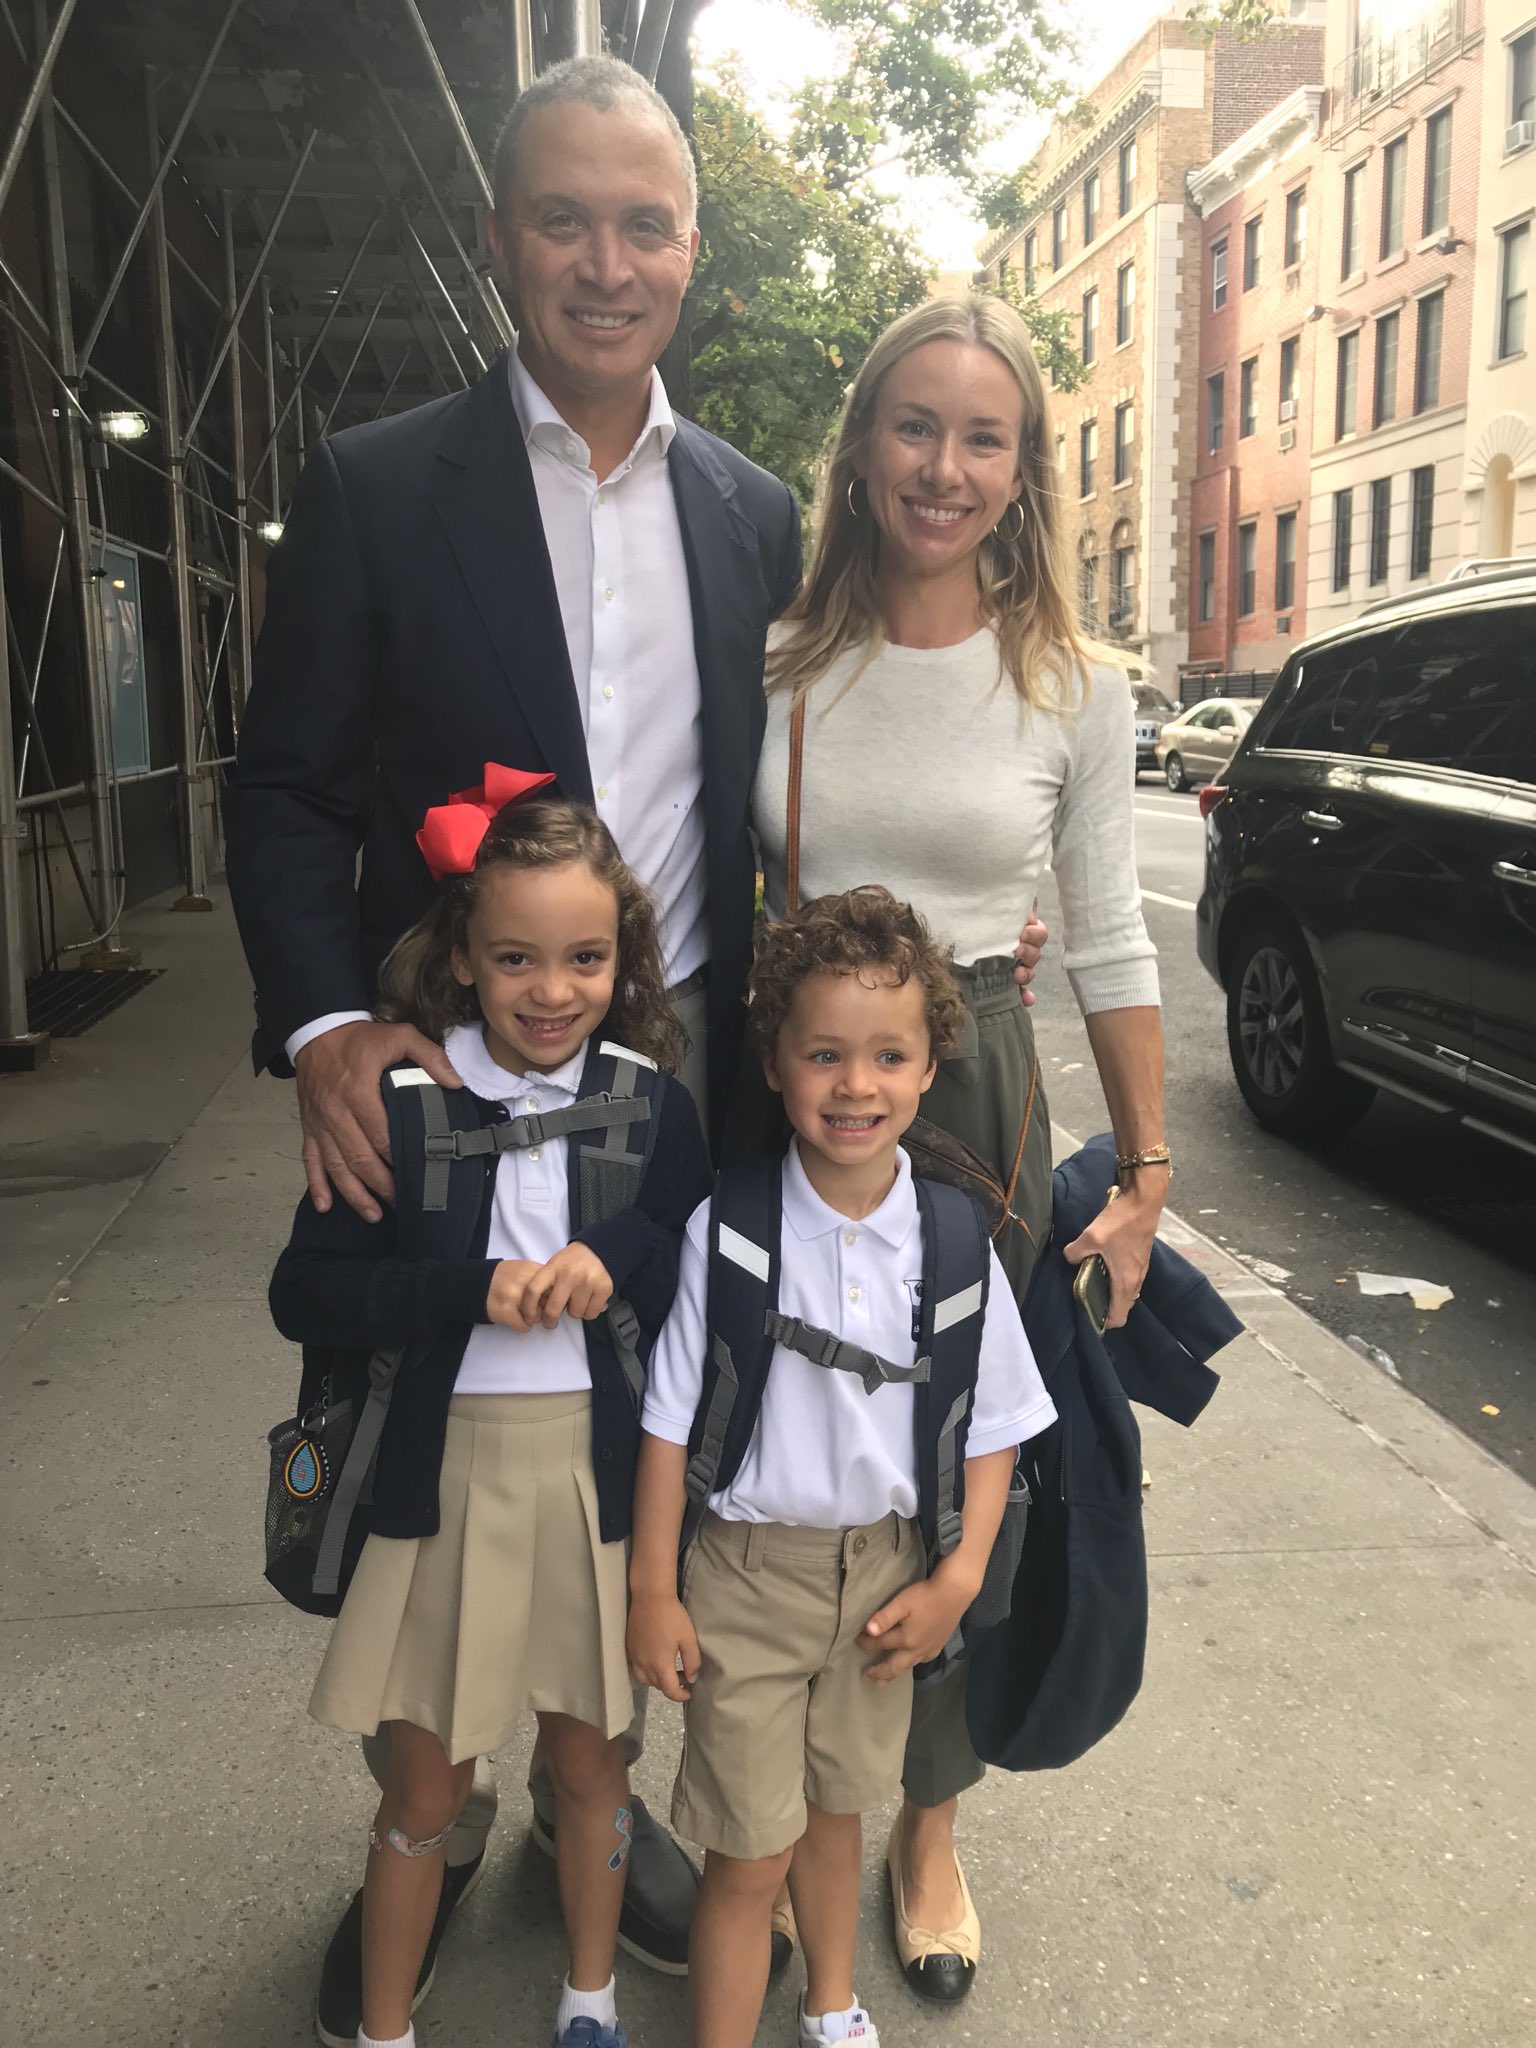 Who Is Harold Ford Jr. Wife? Meet Emily Threlkeld Internewscast